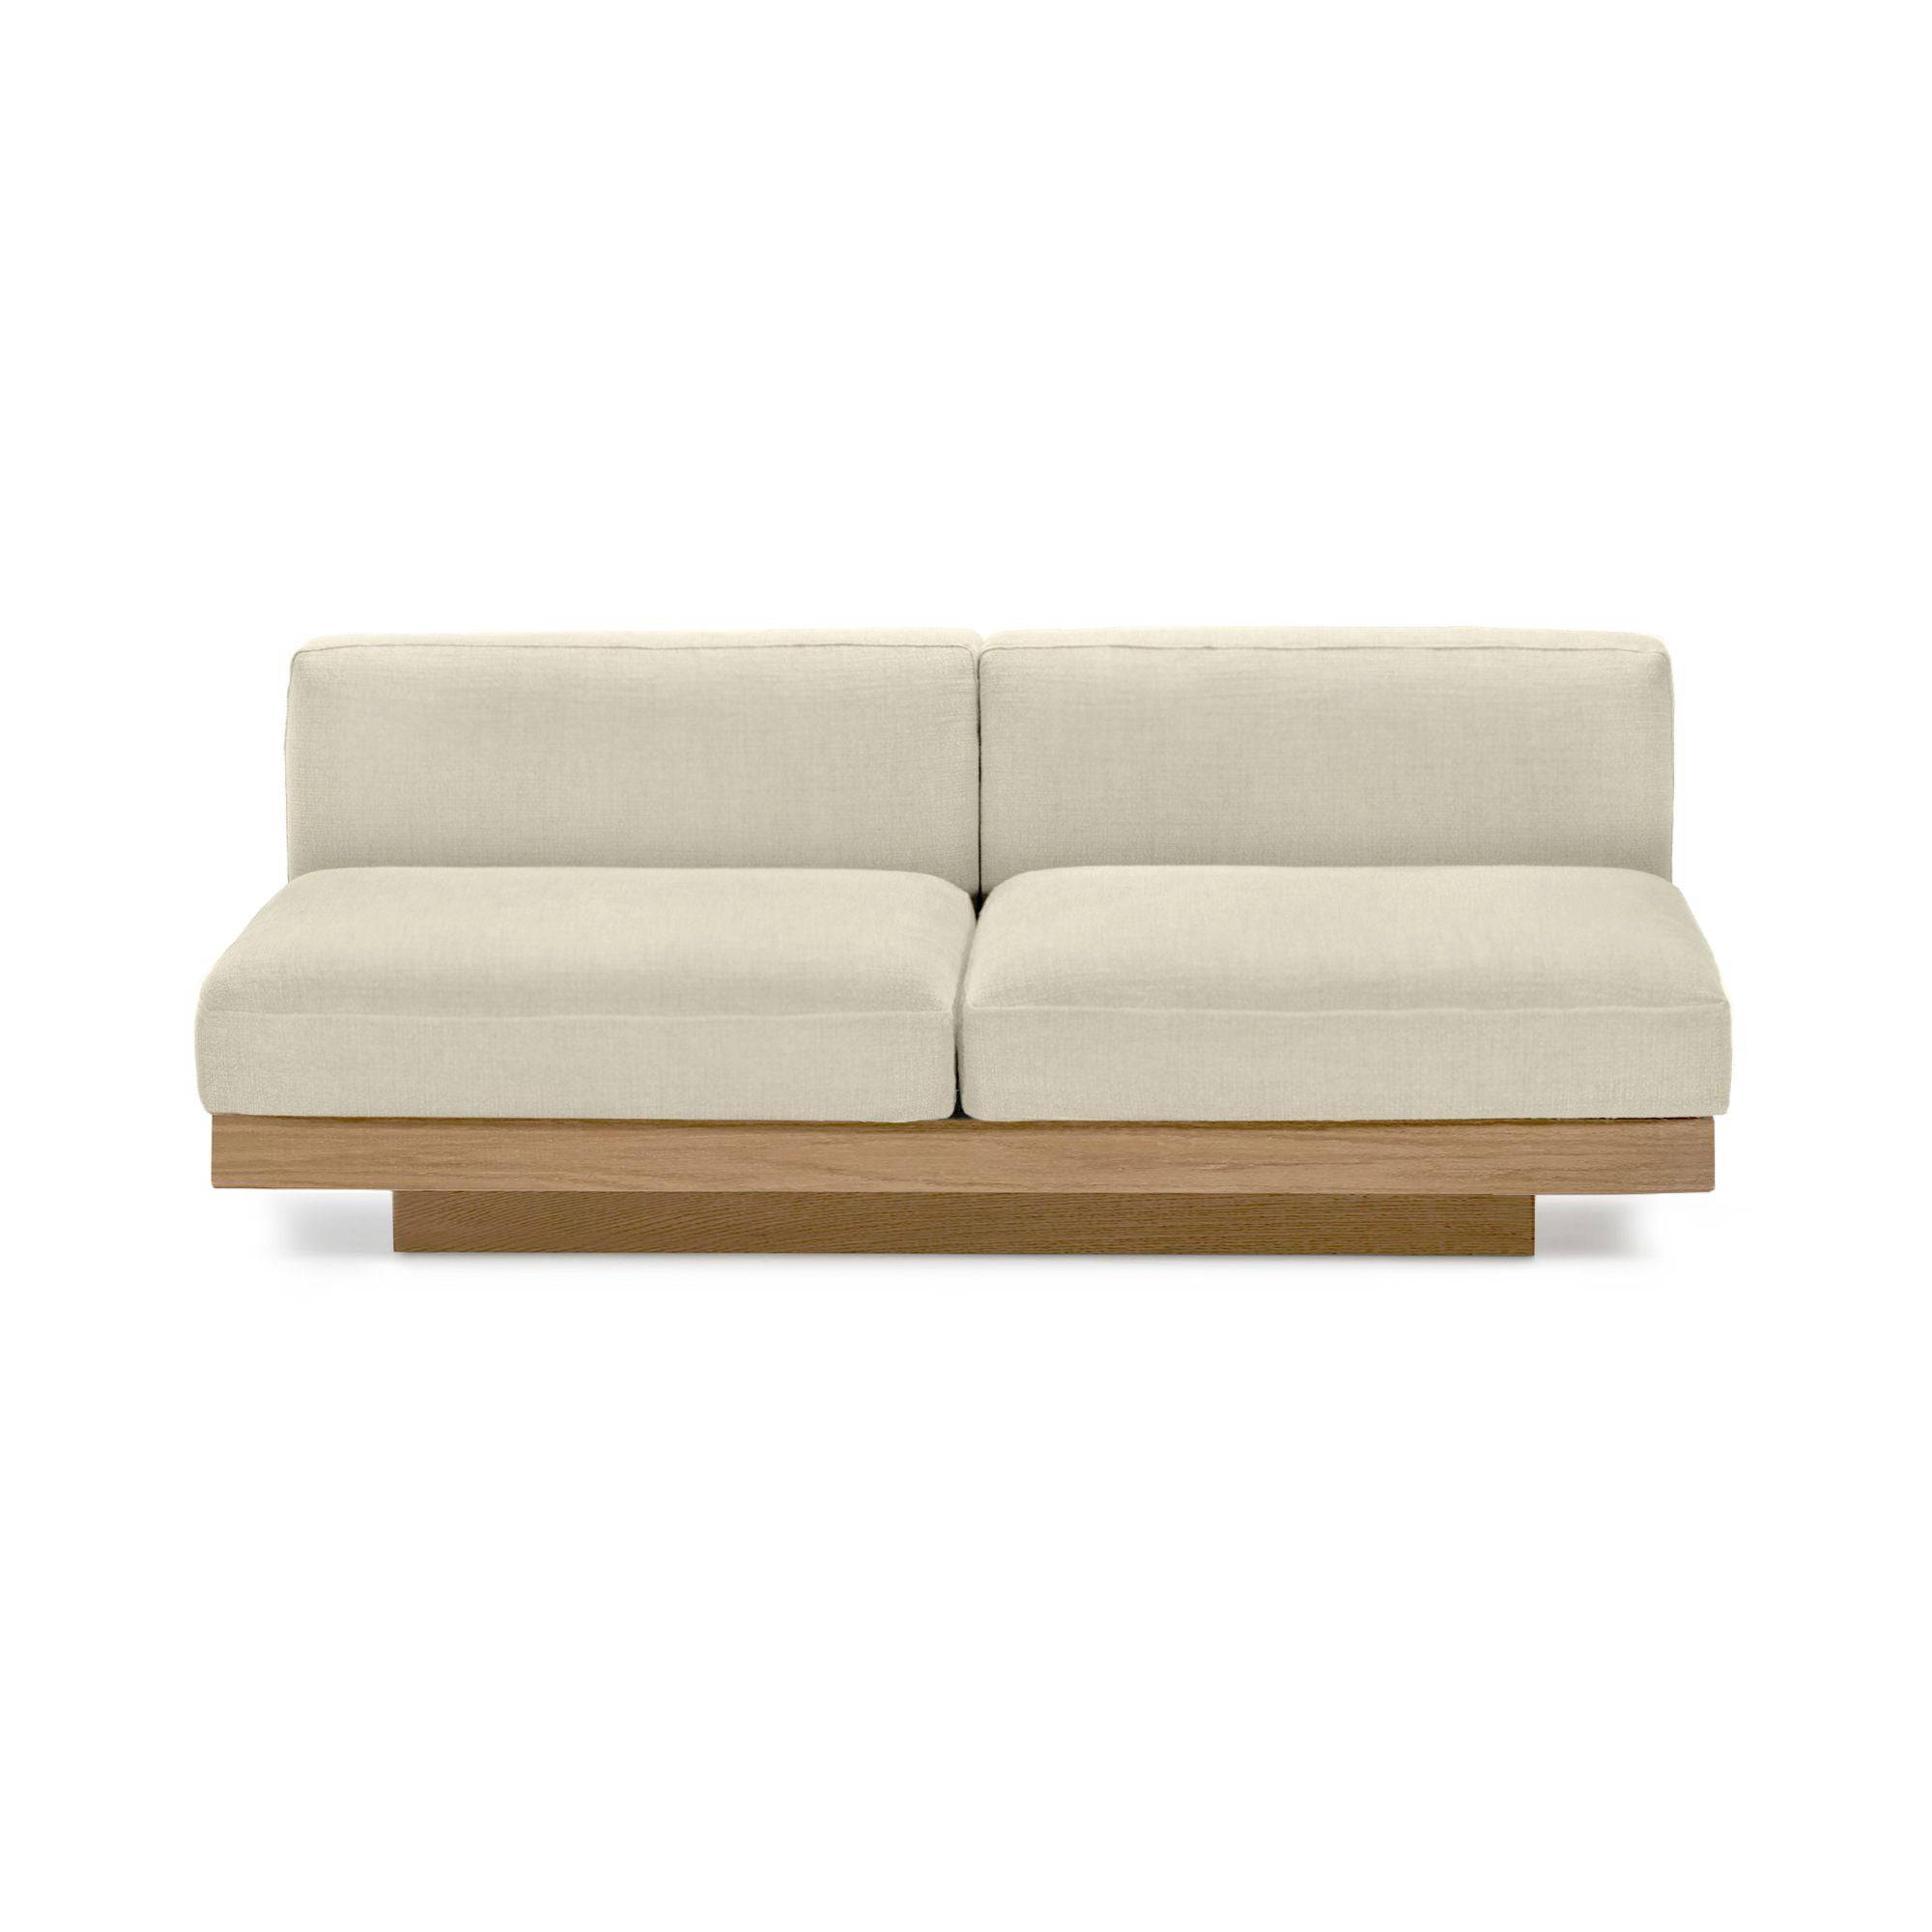 Outdoor Rudolph 2-seater Sofa - THAT COOL LIVING